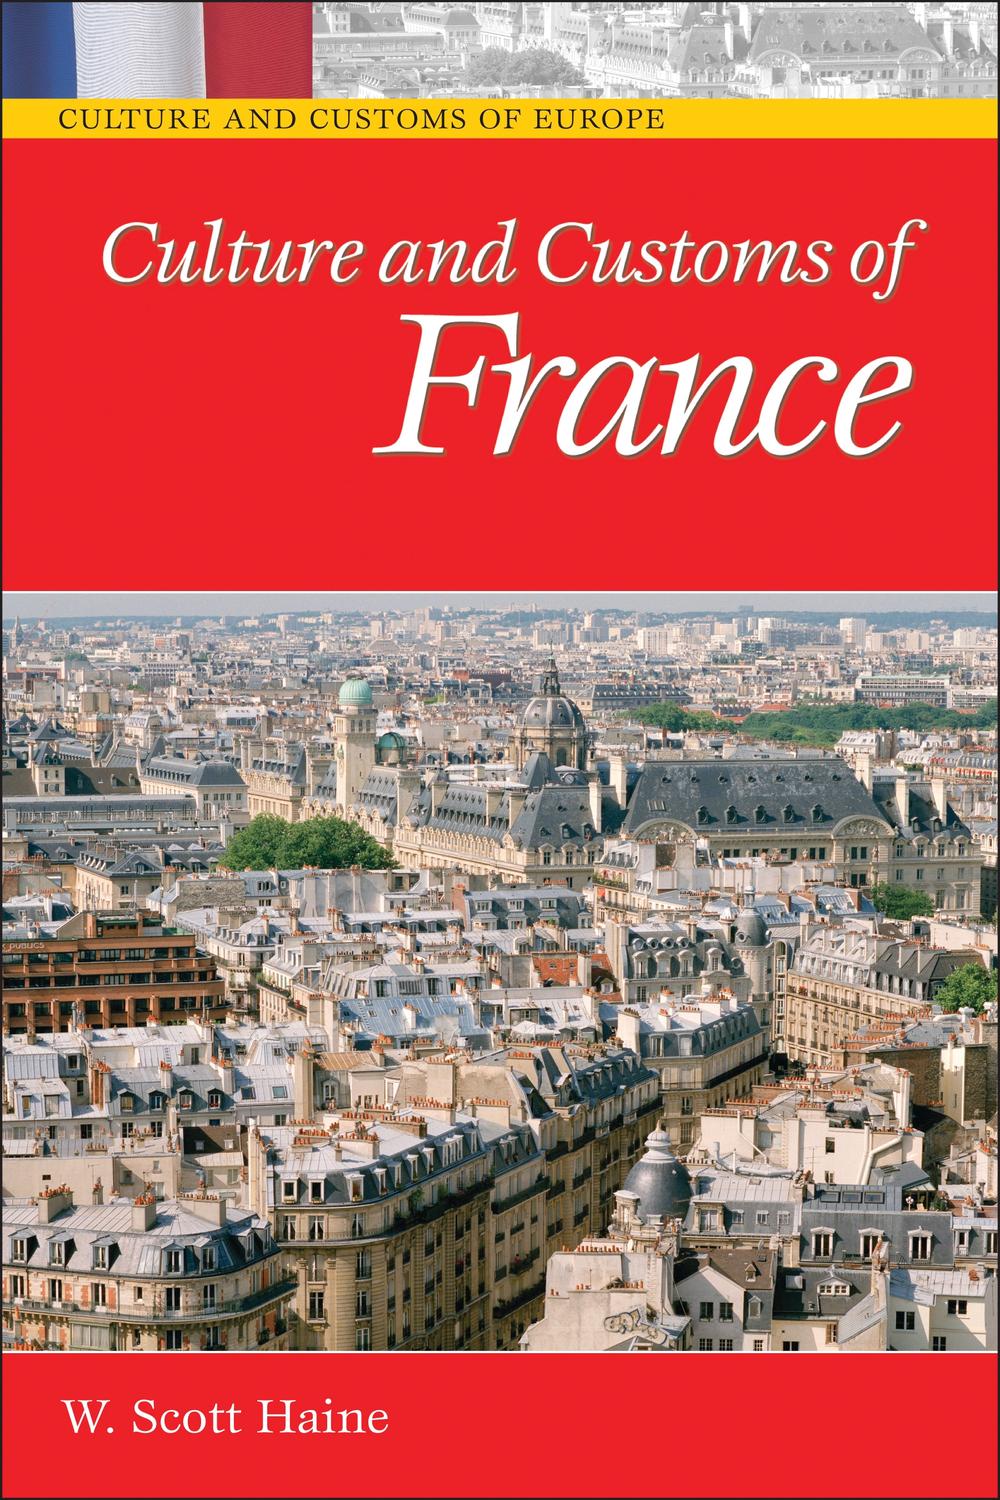 Culture and Customs of France - W. Scott Haine Ph.D.